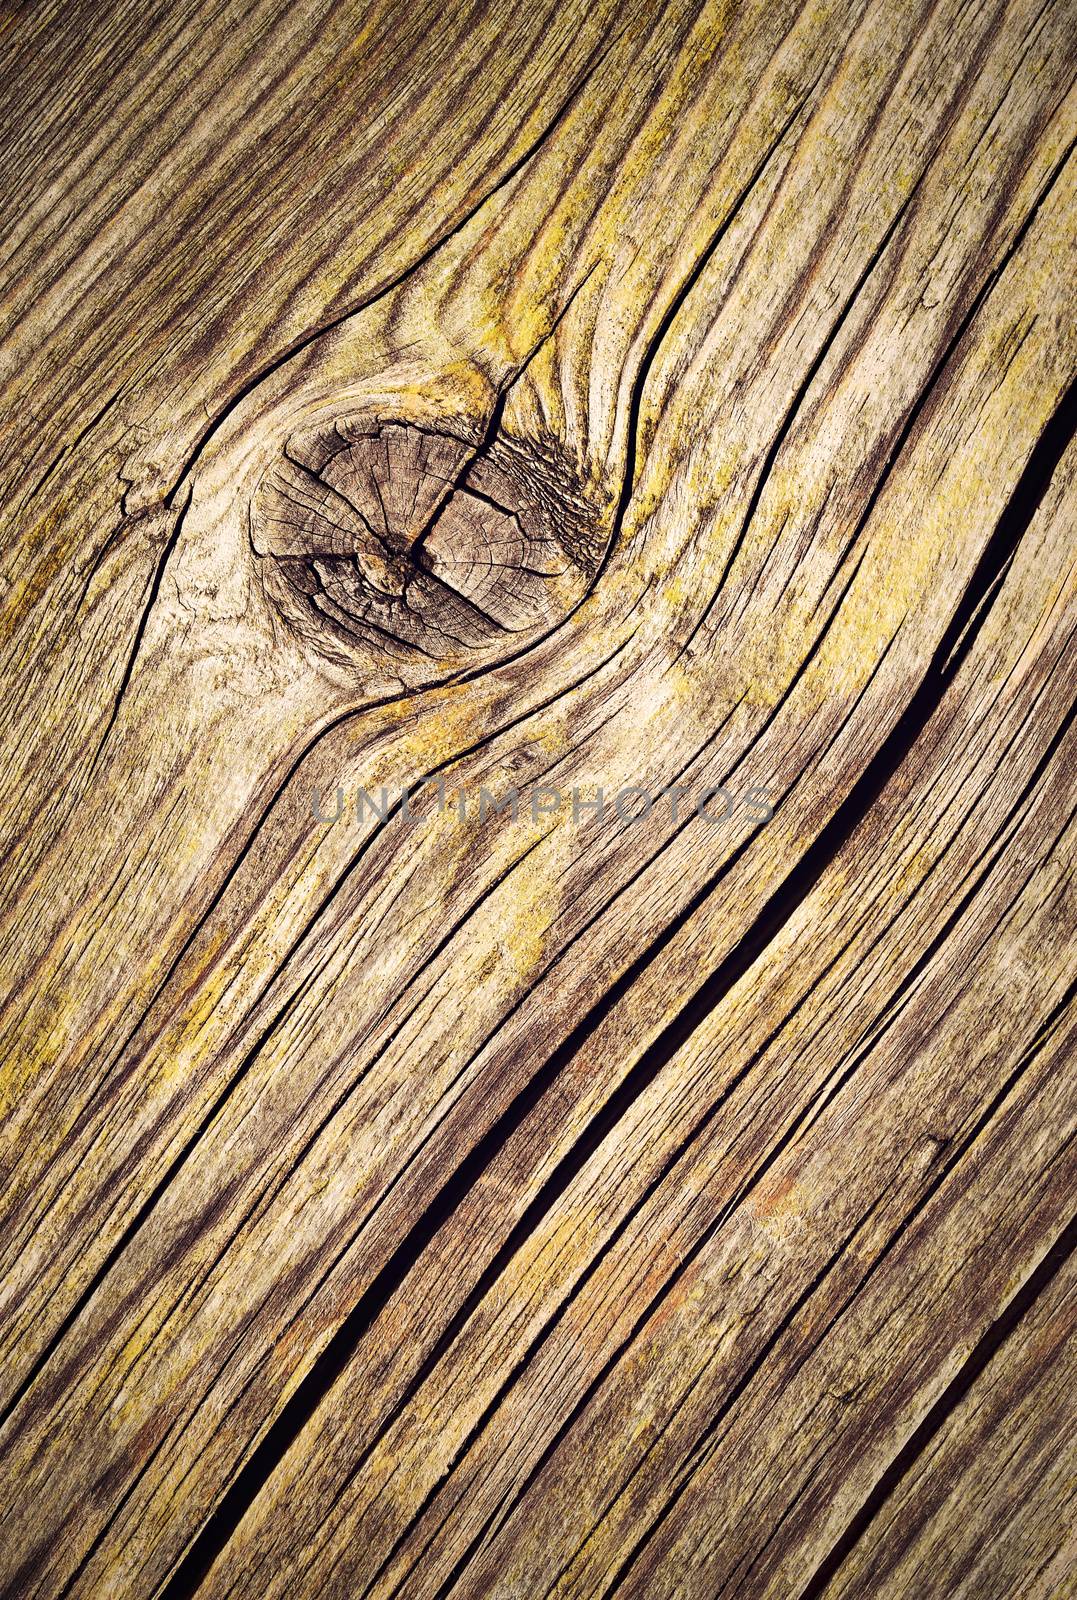 abstract background or texture wooden board in knot